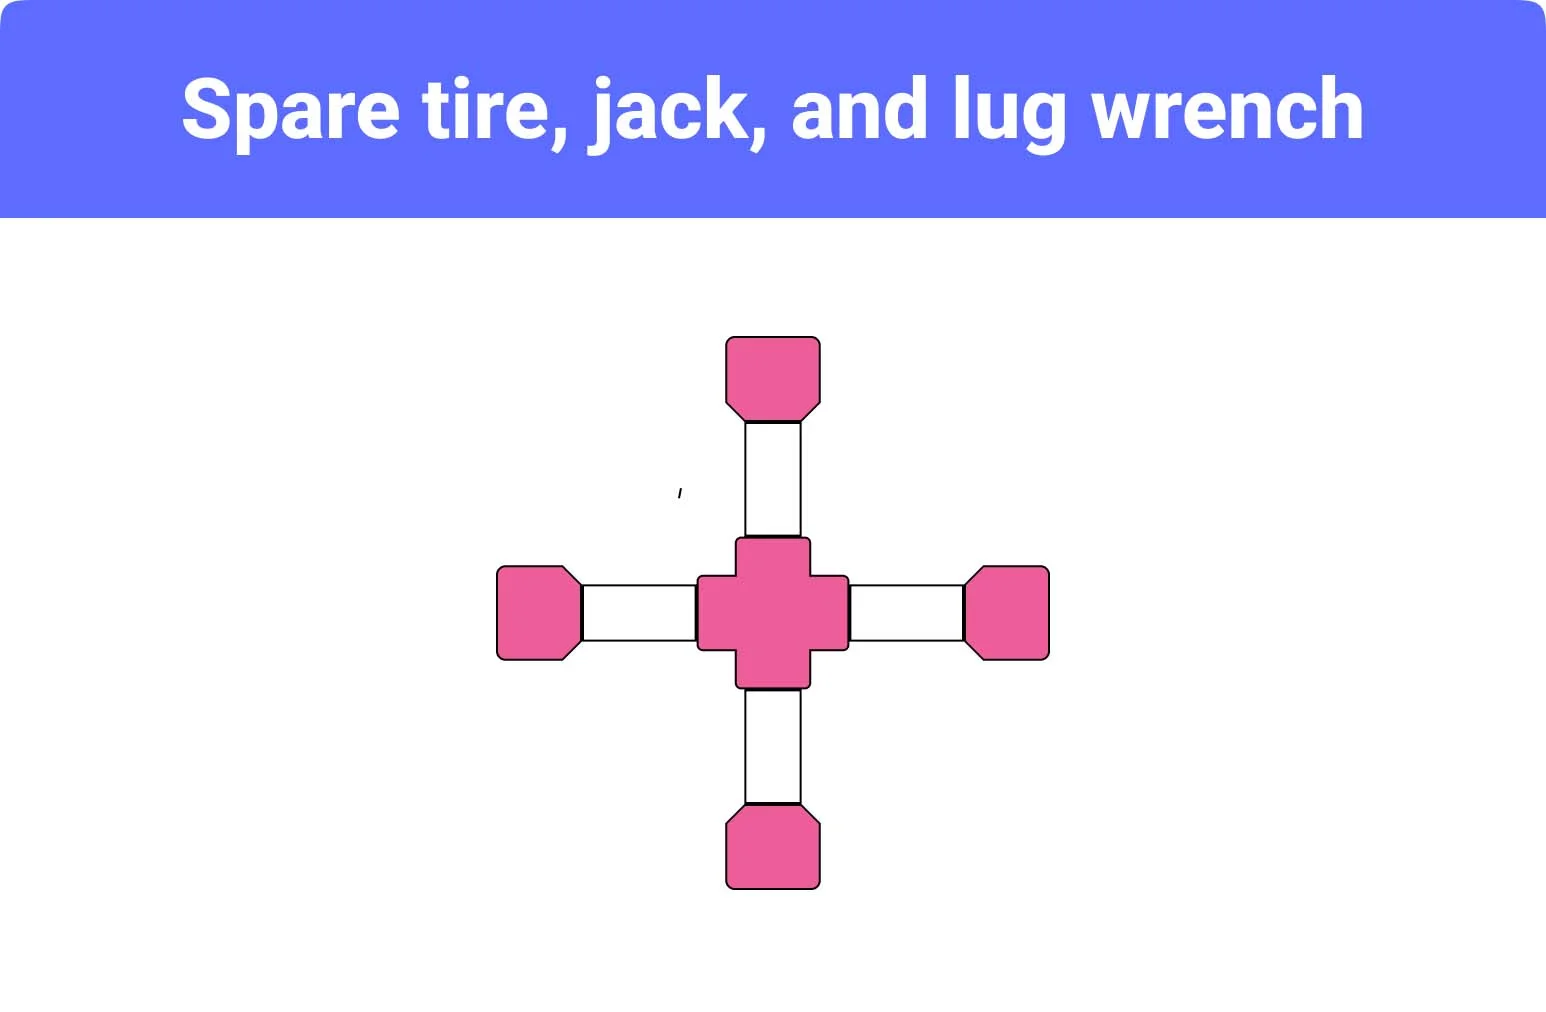 Spare tire, jack, and lug wrench